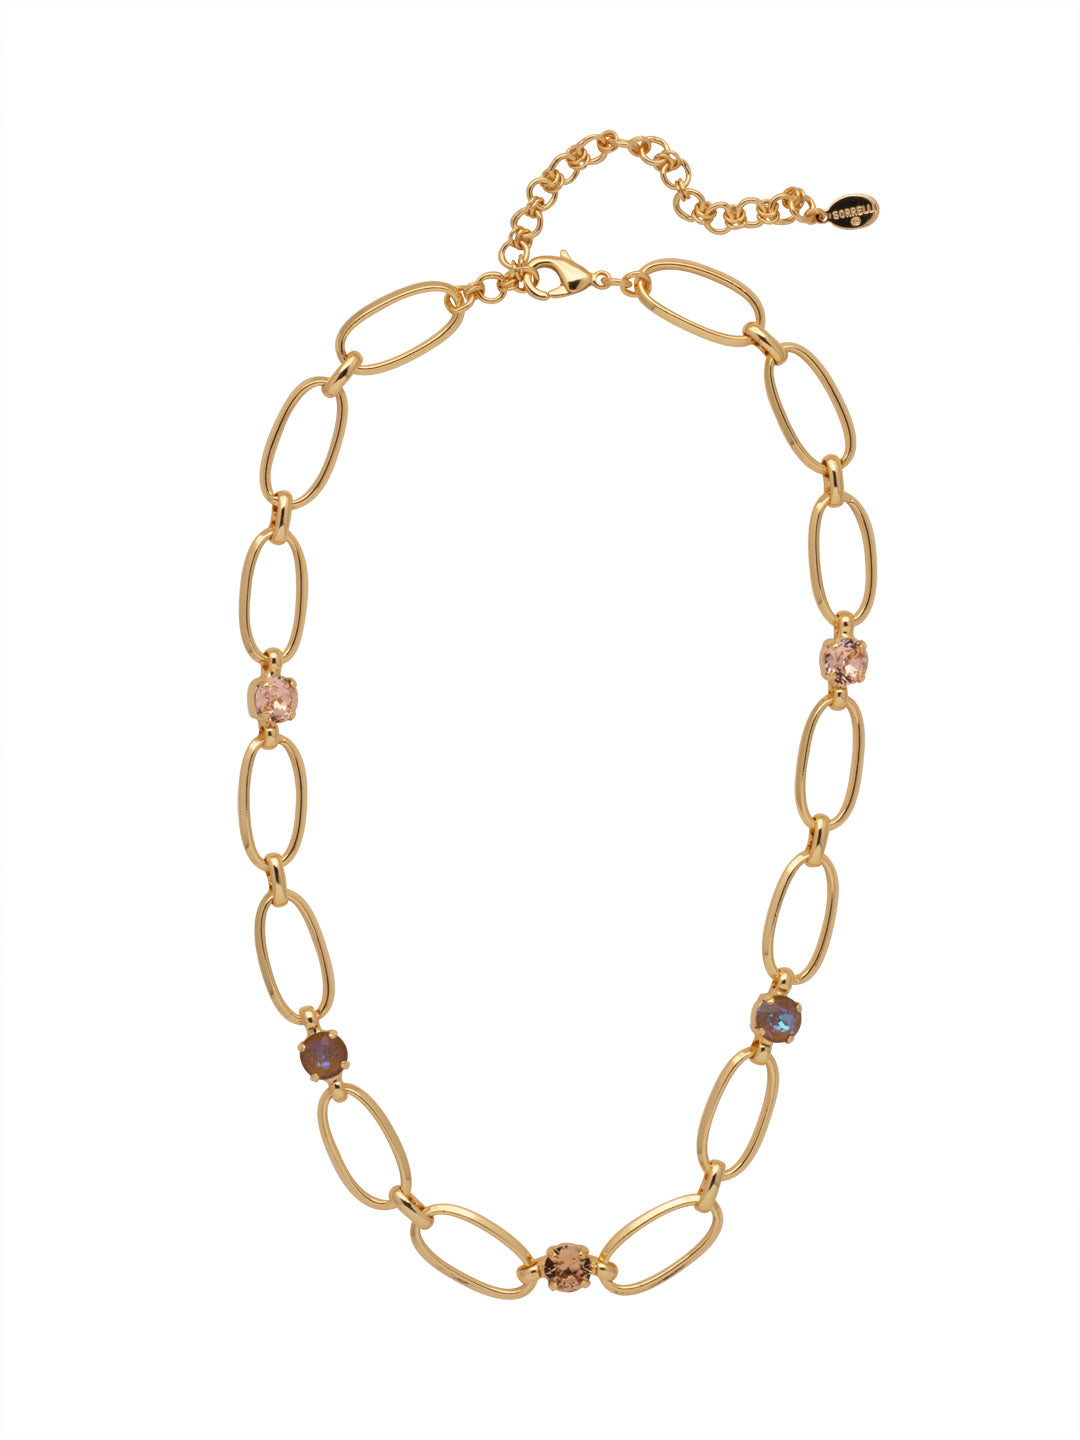 Paige Tennis Necklace - NET3BGRSU - <p>The Paige Tennis Necklace is open, airy and sparkly, too. Metallic links are joined with round Sorrelli crystals that shine bright. From Sorrelli's Raw Sugar collection in our Bright Gold-tone finish.</p>